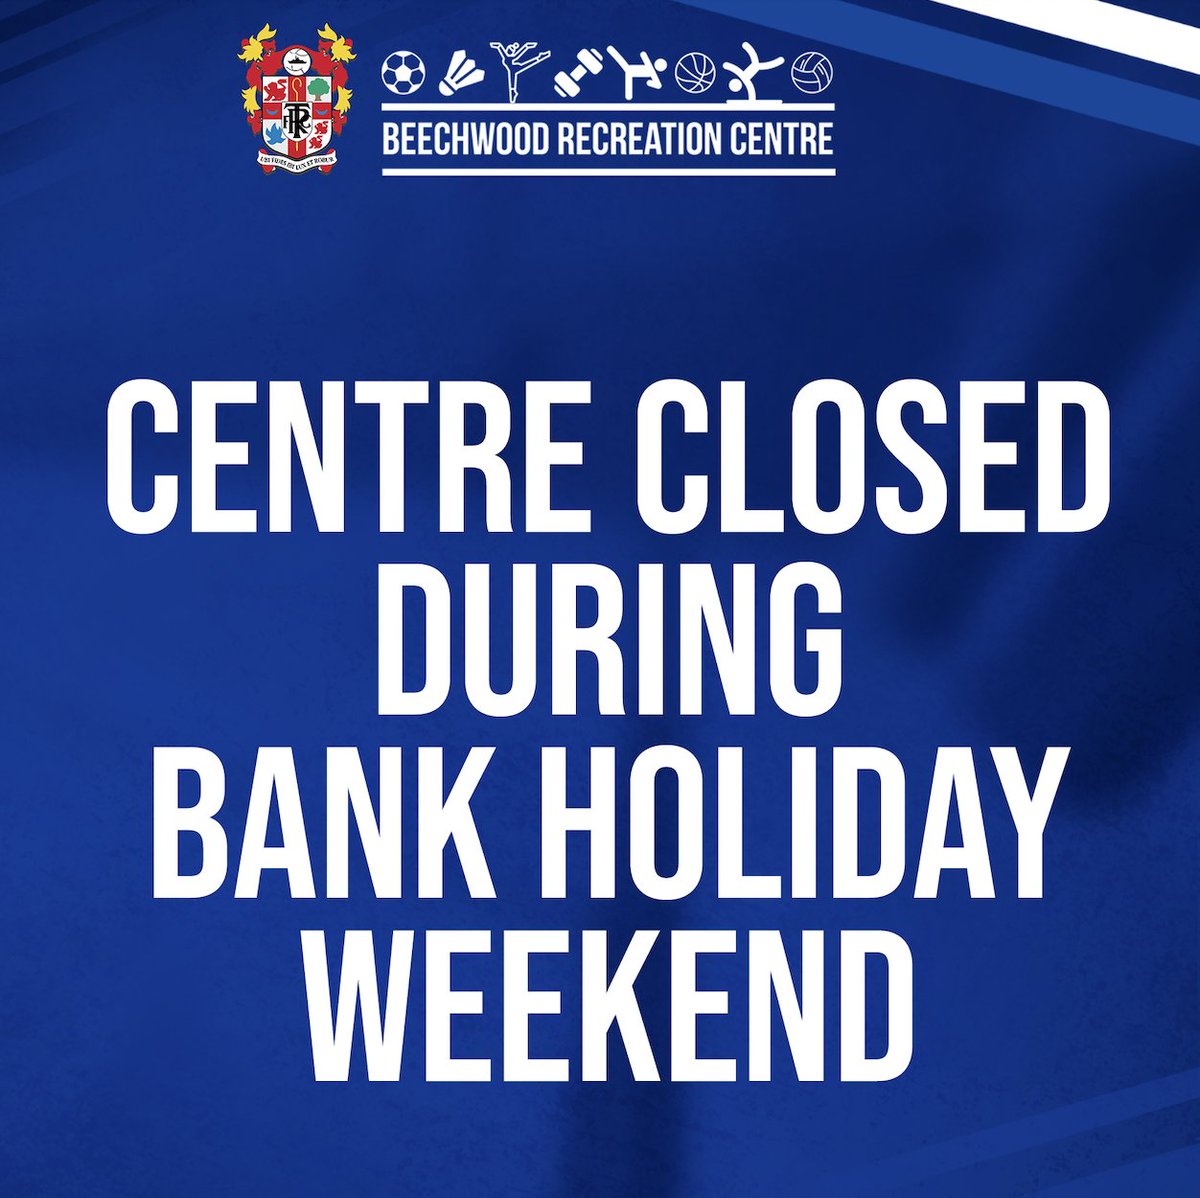 ⛔️ We will be closed over the Easter Bank Holiday weekend. Apologies for any inconvenience caused. #TRFC #SWA